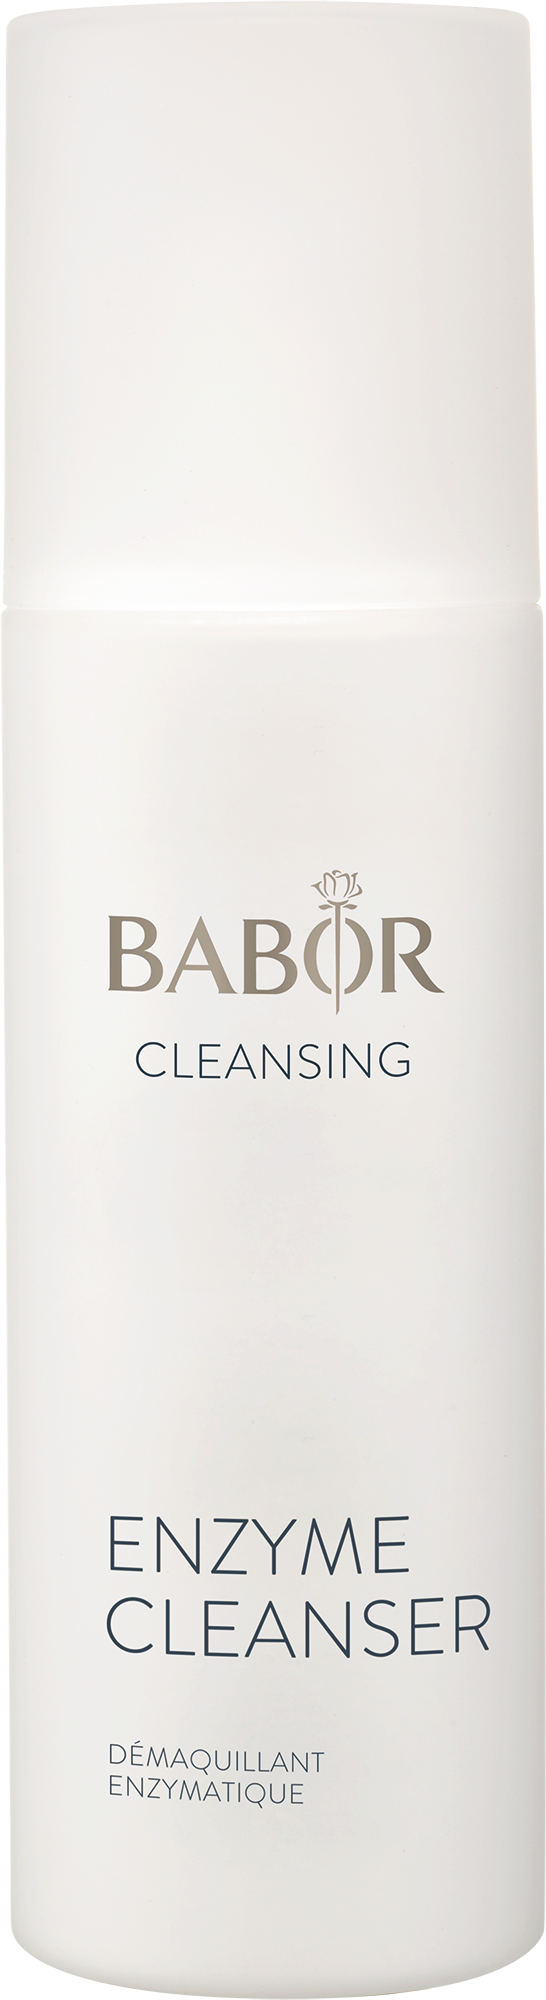 Babor enzyme cleanser. Babor ферментная пудра. Babor Cleansing Enzyme Cleanser. Babor Cleansing энзимная пудра.